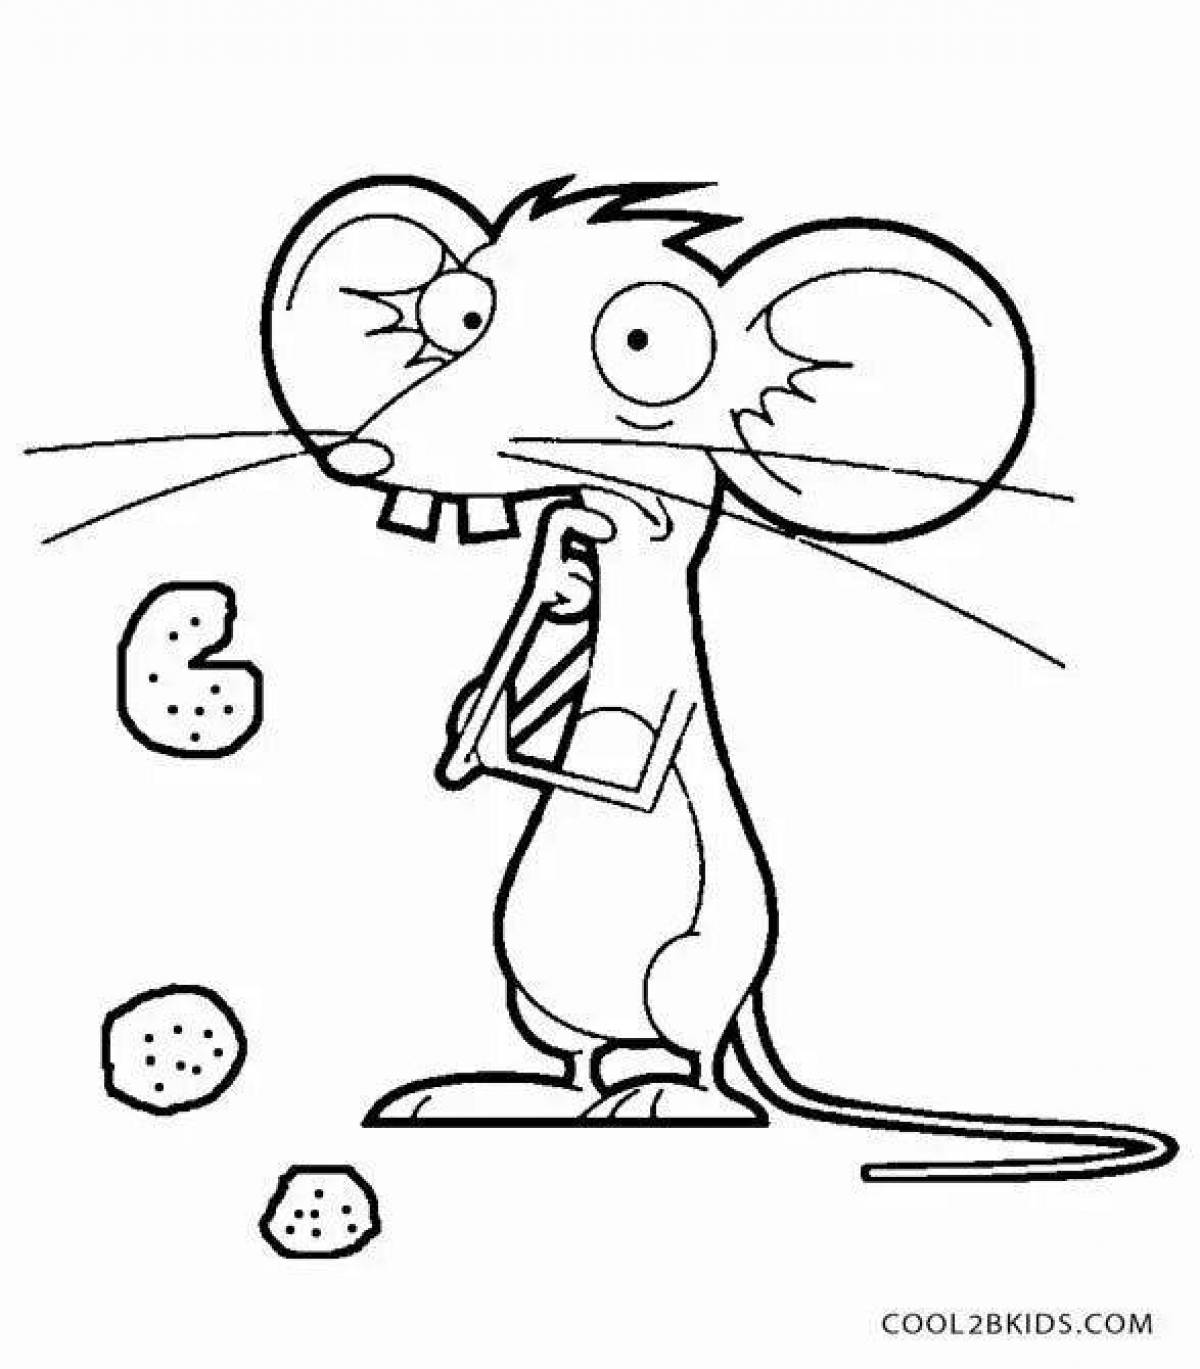 Animated mouse sausage coloring page